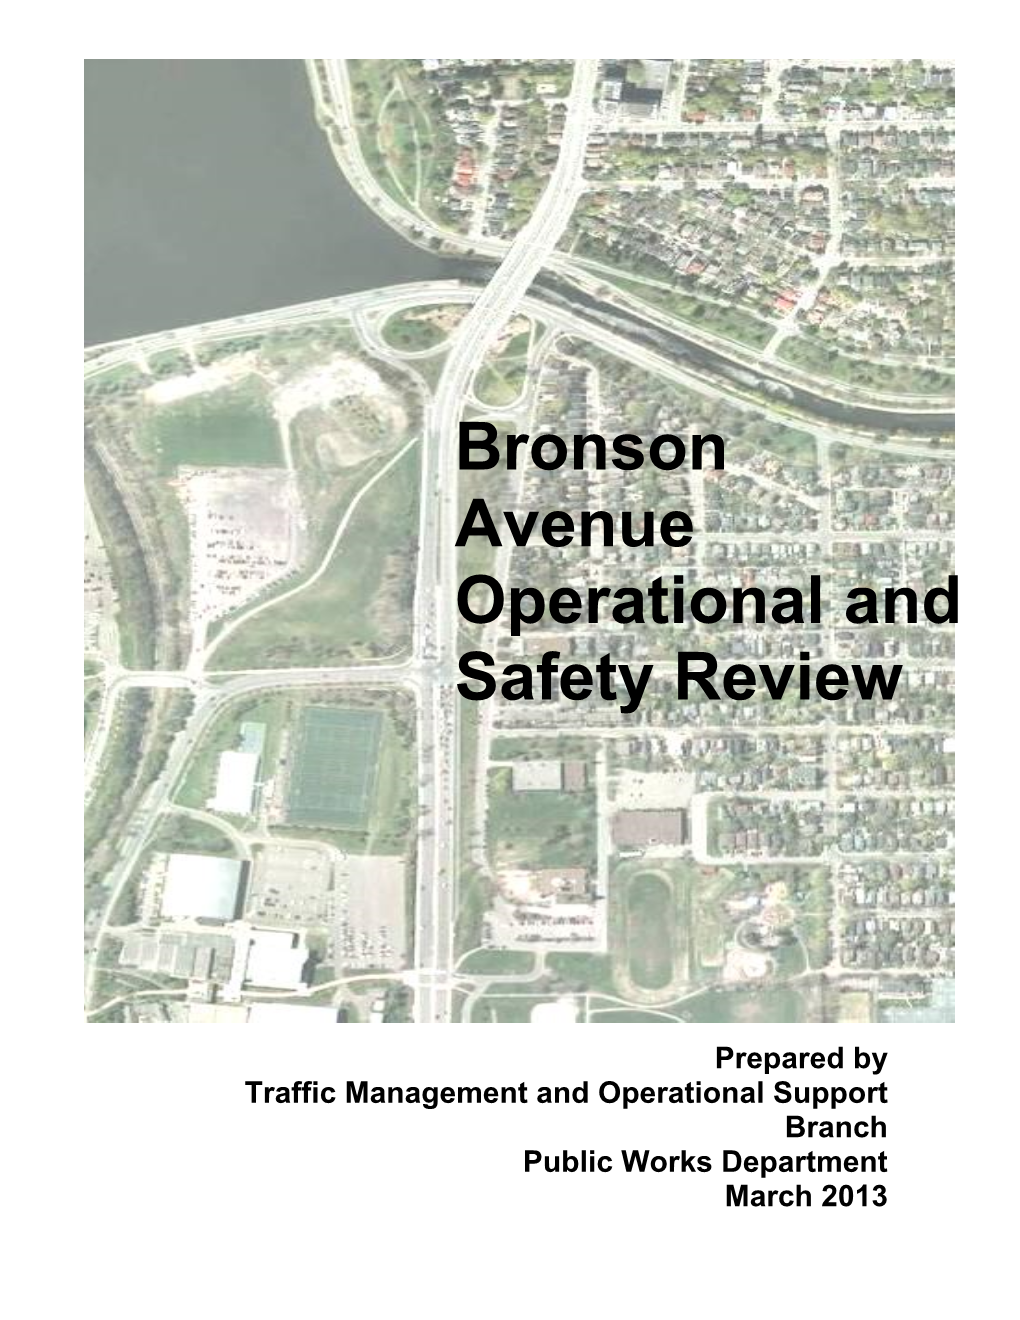 Bronson Avenue Operational and Safety Review